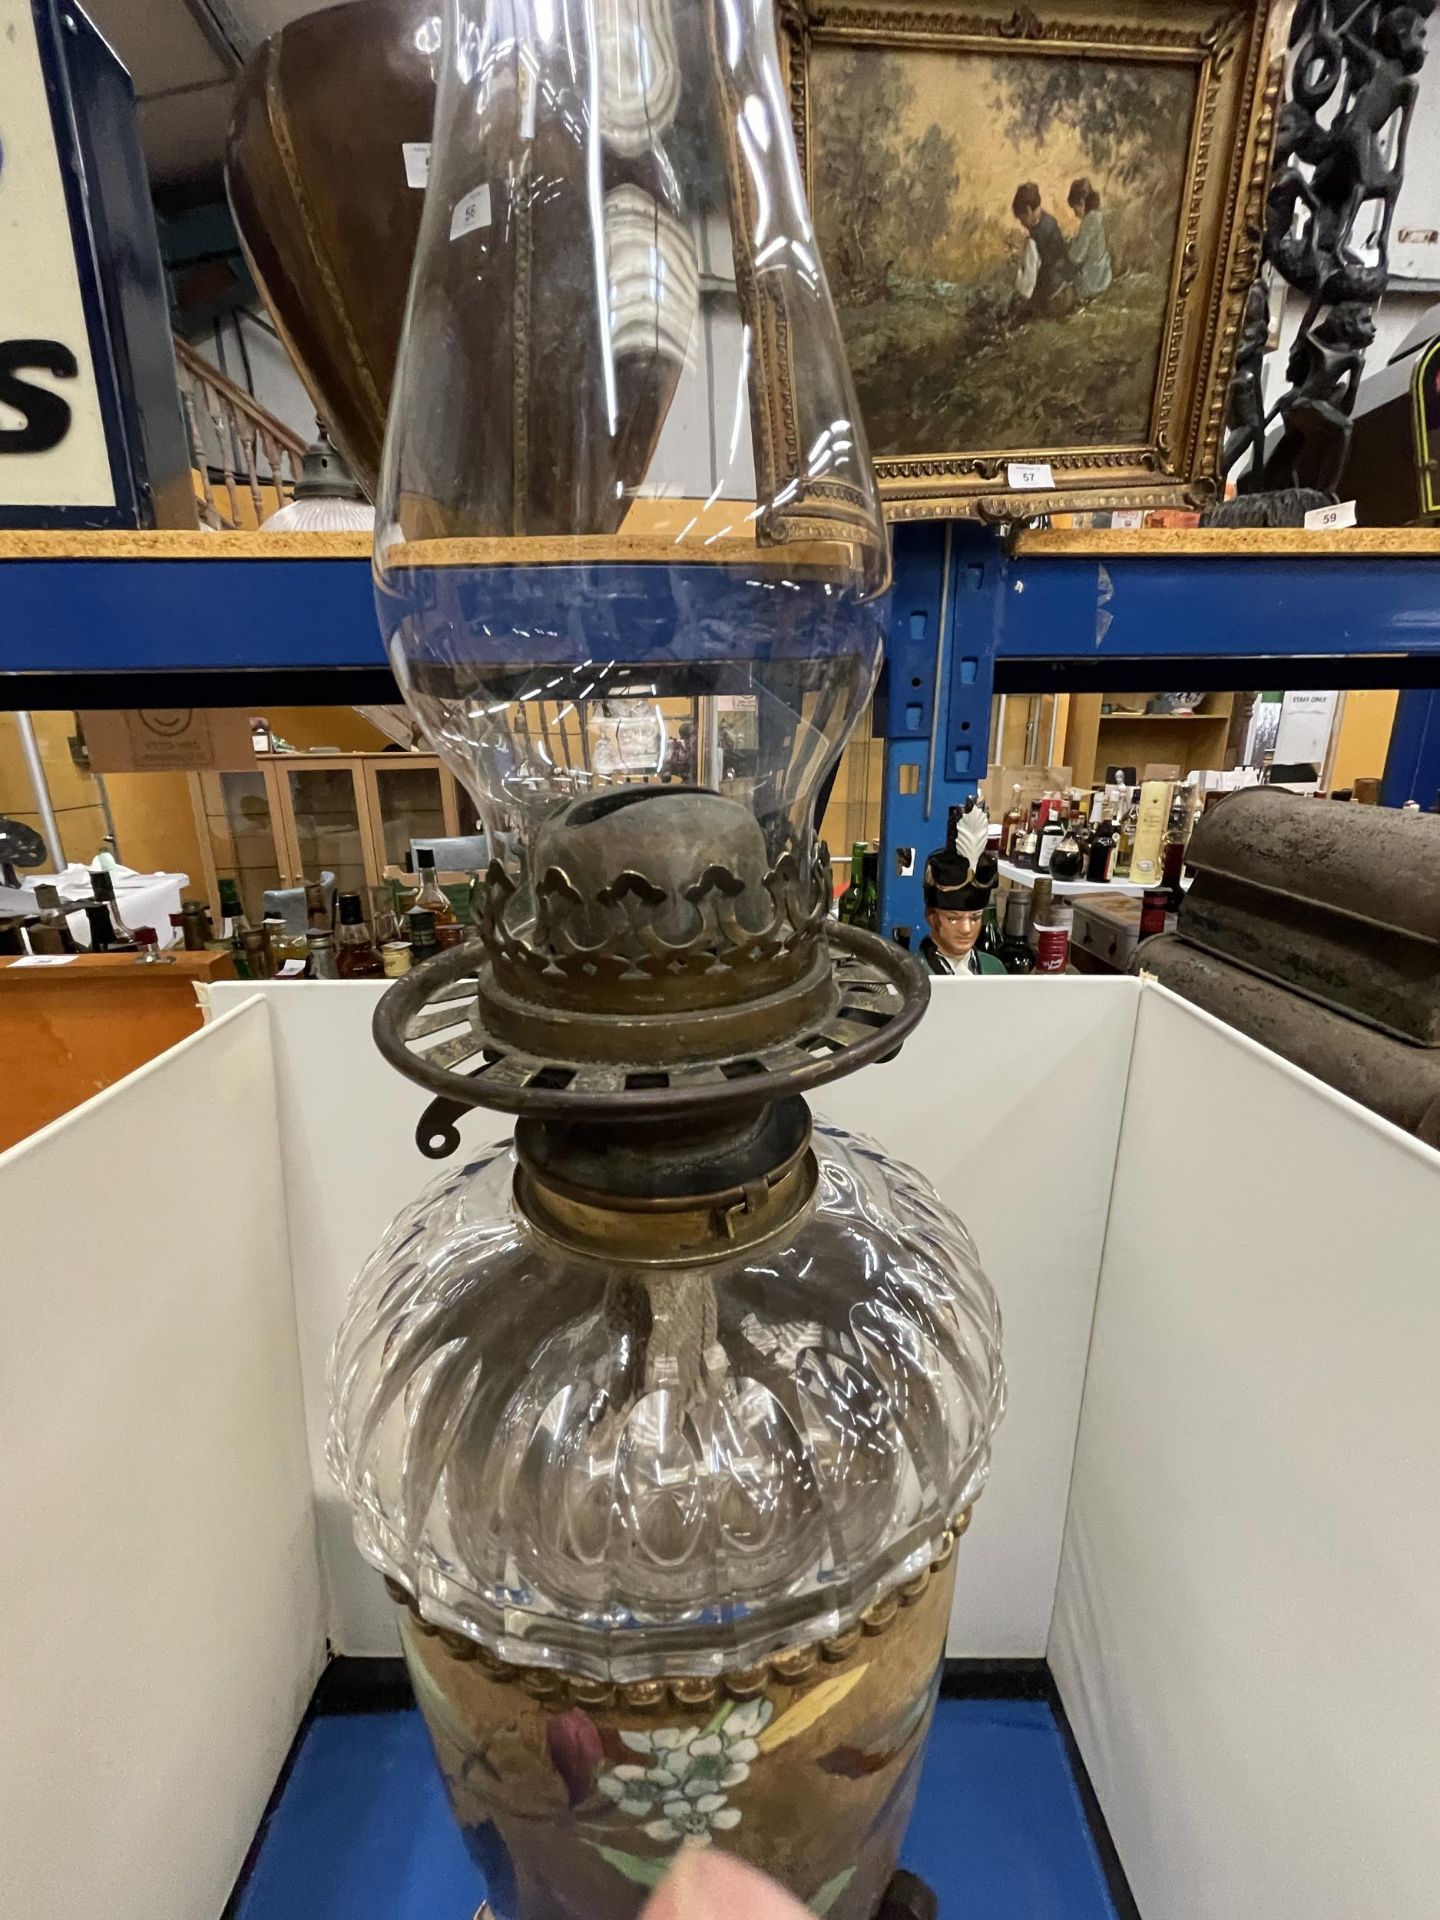 AN ORNATE VICTORIAN OIL LAMP WITH GLASS FUNNEL - Image 3 of 6